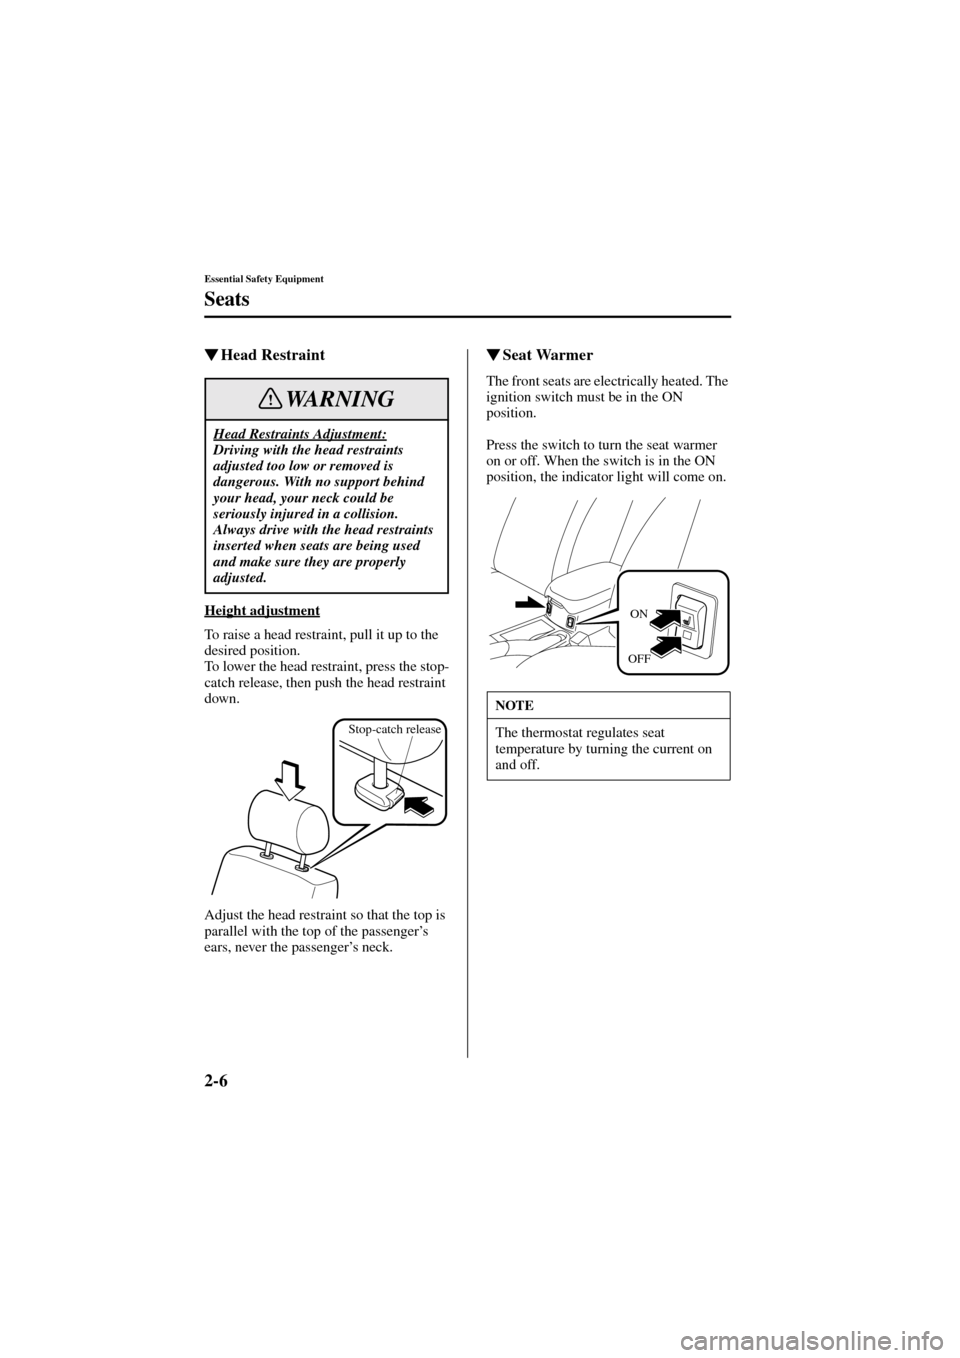 MAZDA MODEL 6 2004   (in English) Owners Manual 2-6
Essential Safety Equipment
Seats
Form No. 8R29-EA-02I
Head Restraint
Height adjustment
To raise a head restraint, pull it up to the 
desired position.
To lower the head restraint, press the stop-